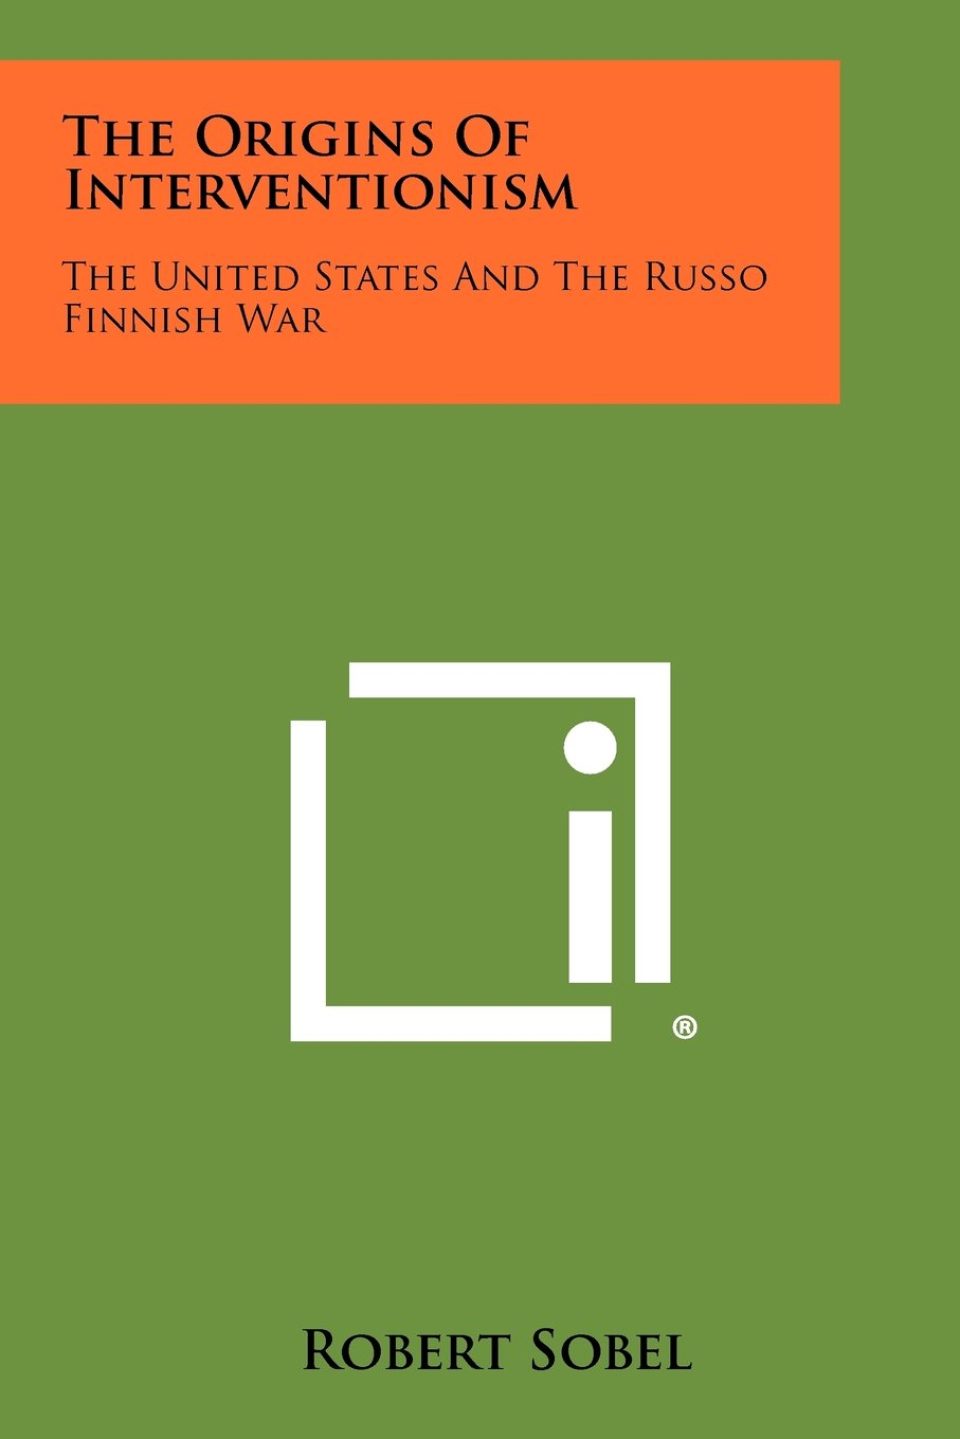 Book of Week: The Origins of Interventionism: The United States and the Russo Finnish War